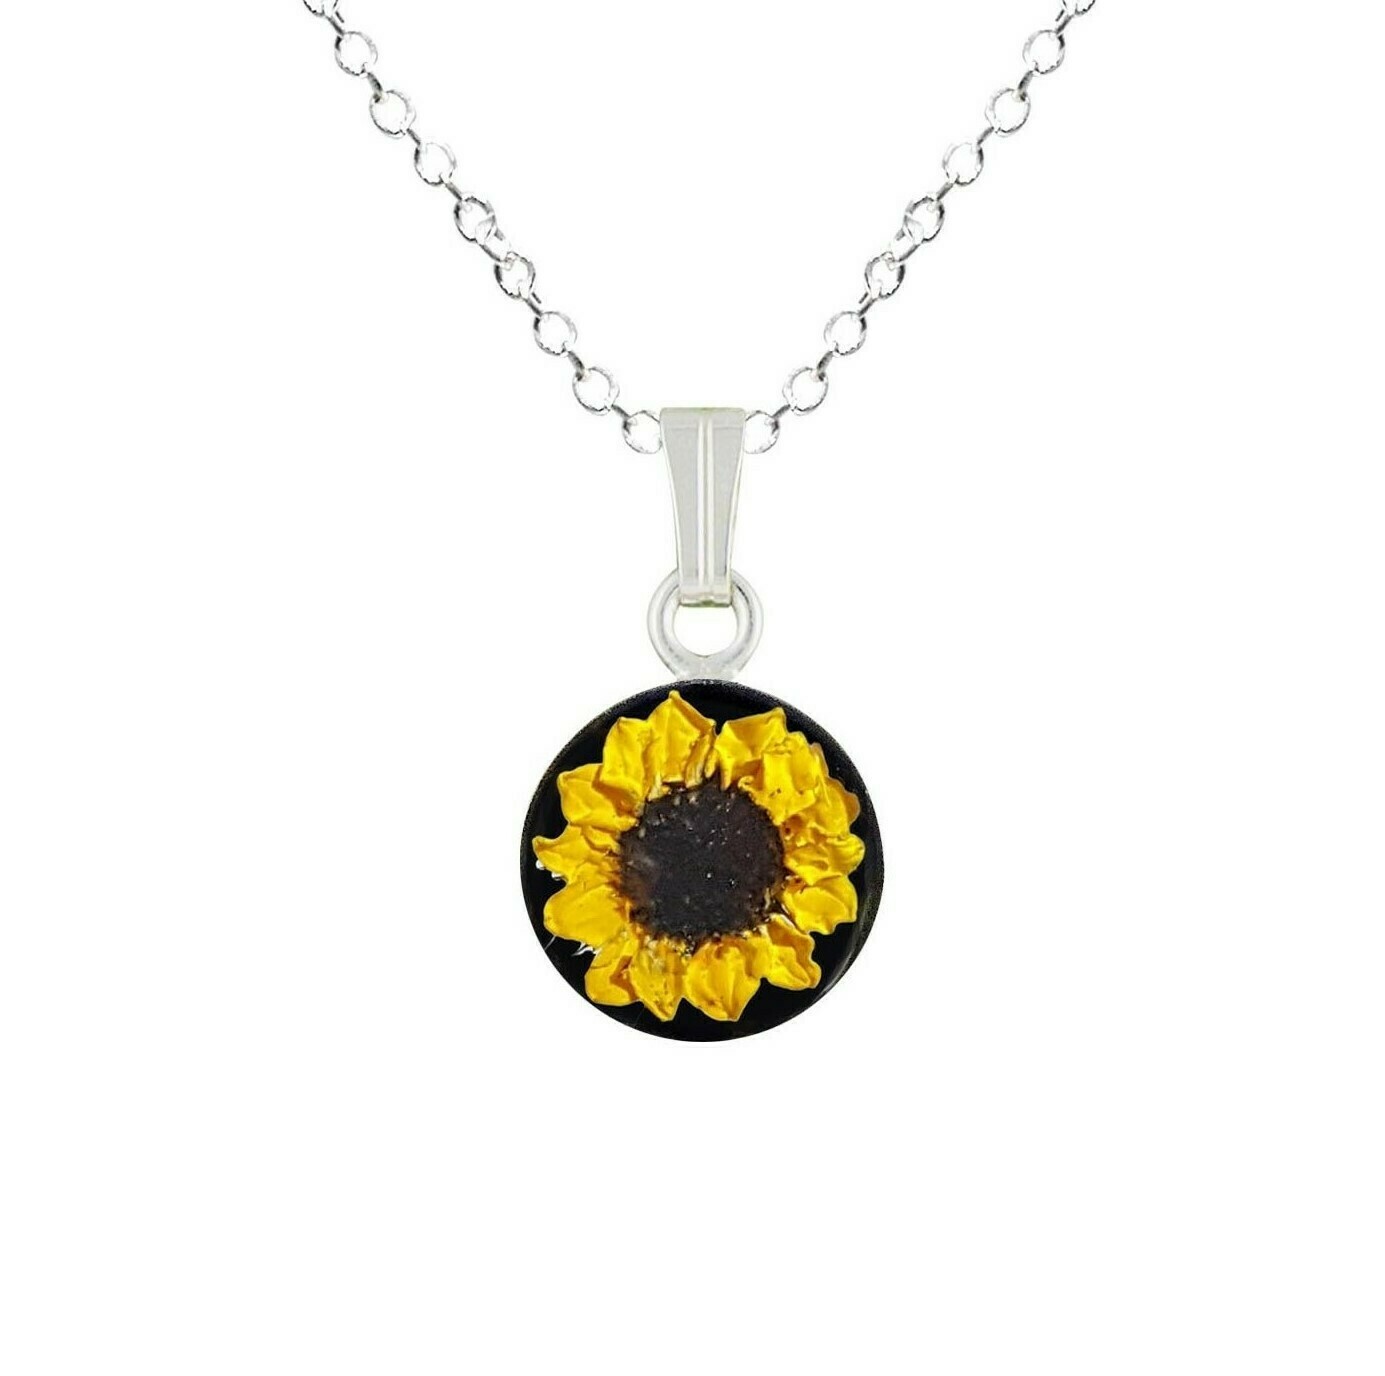 Sunflower Necklace, Small Circle, Black Background